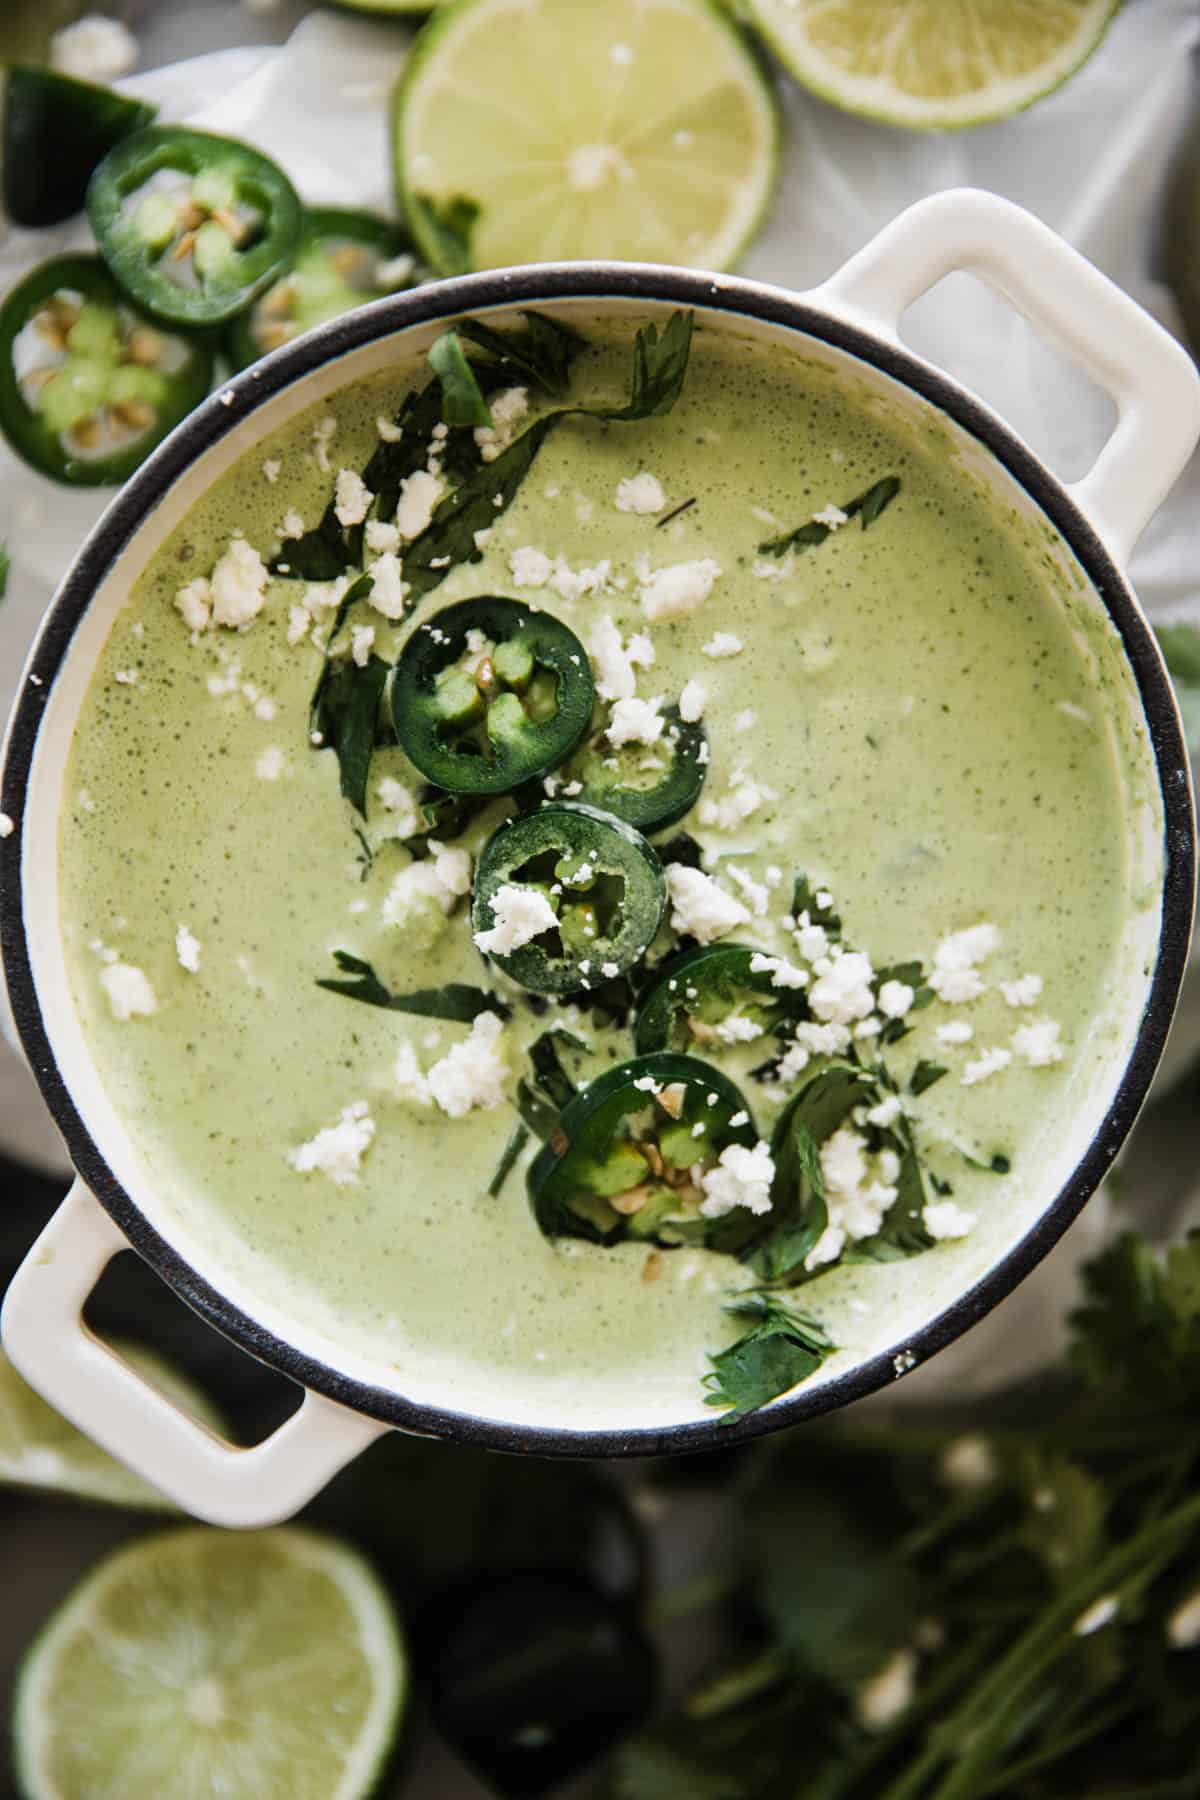 Creamy jalapeno sauce in a bowl topped with cilantro, fresh jalapeño and cheese.